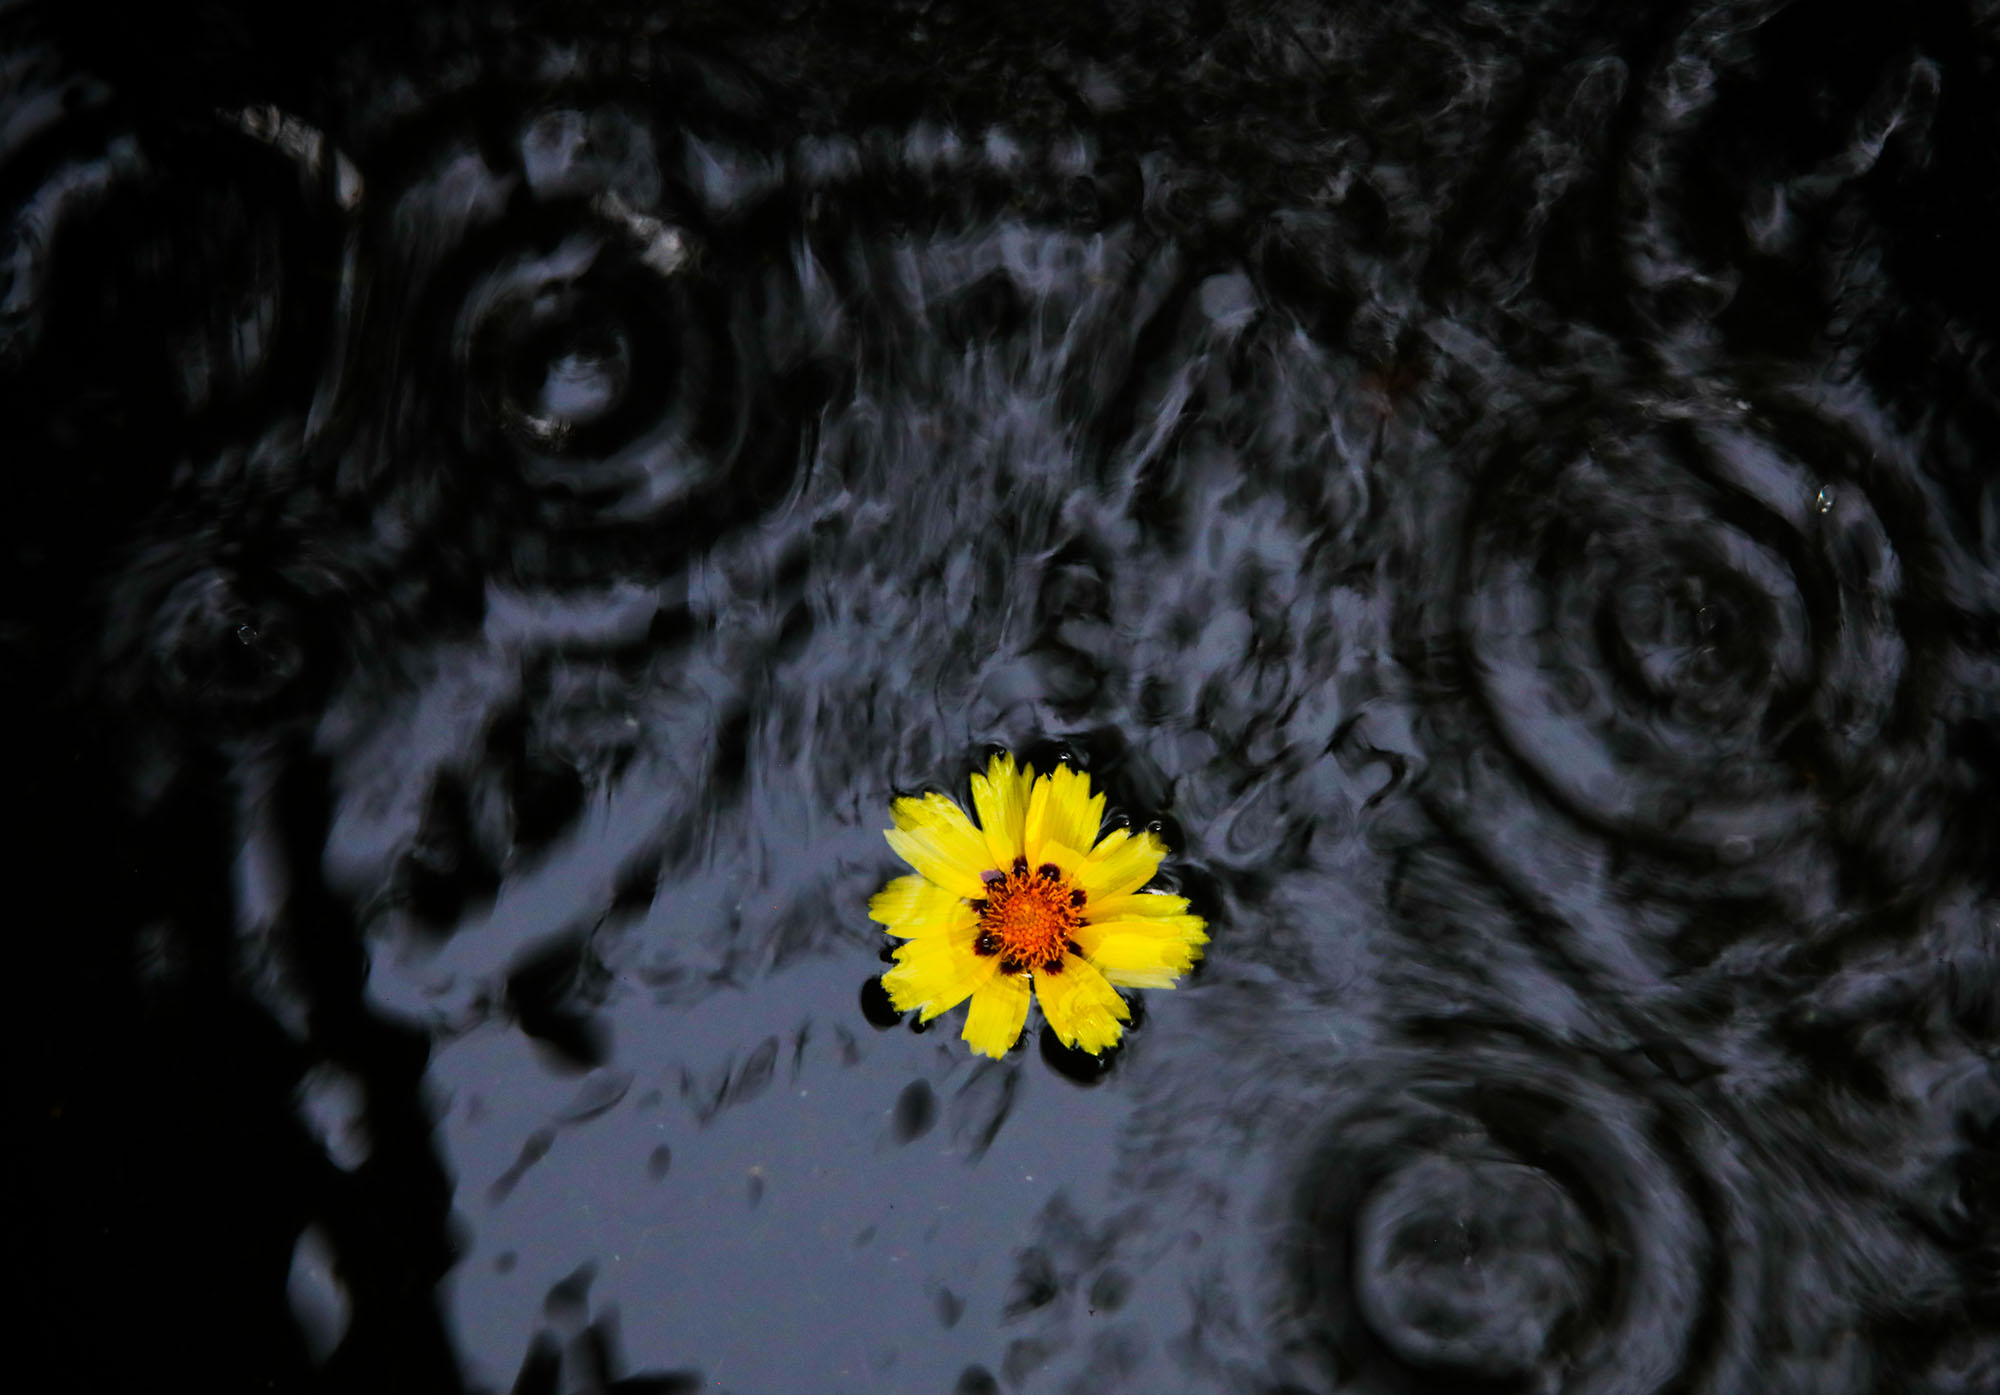 A Coreopsis, the state wildflower of Florida, floats among the ripples of rain water that have filled a dog's water bowl in a backyard of Gainesville, Florida on Wednesday, June 23, 2021.